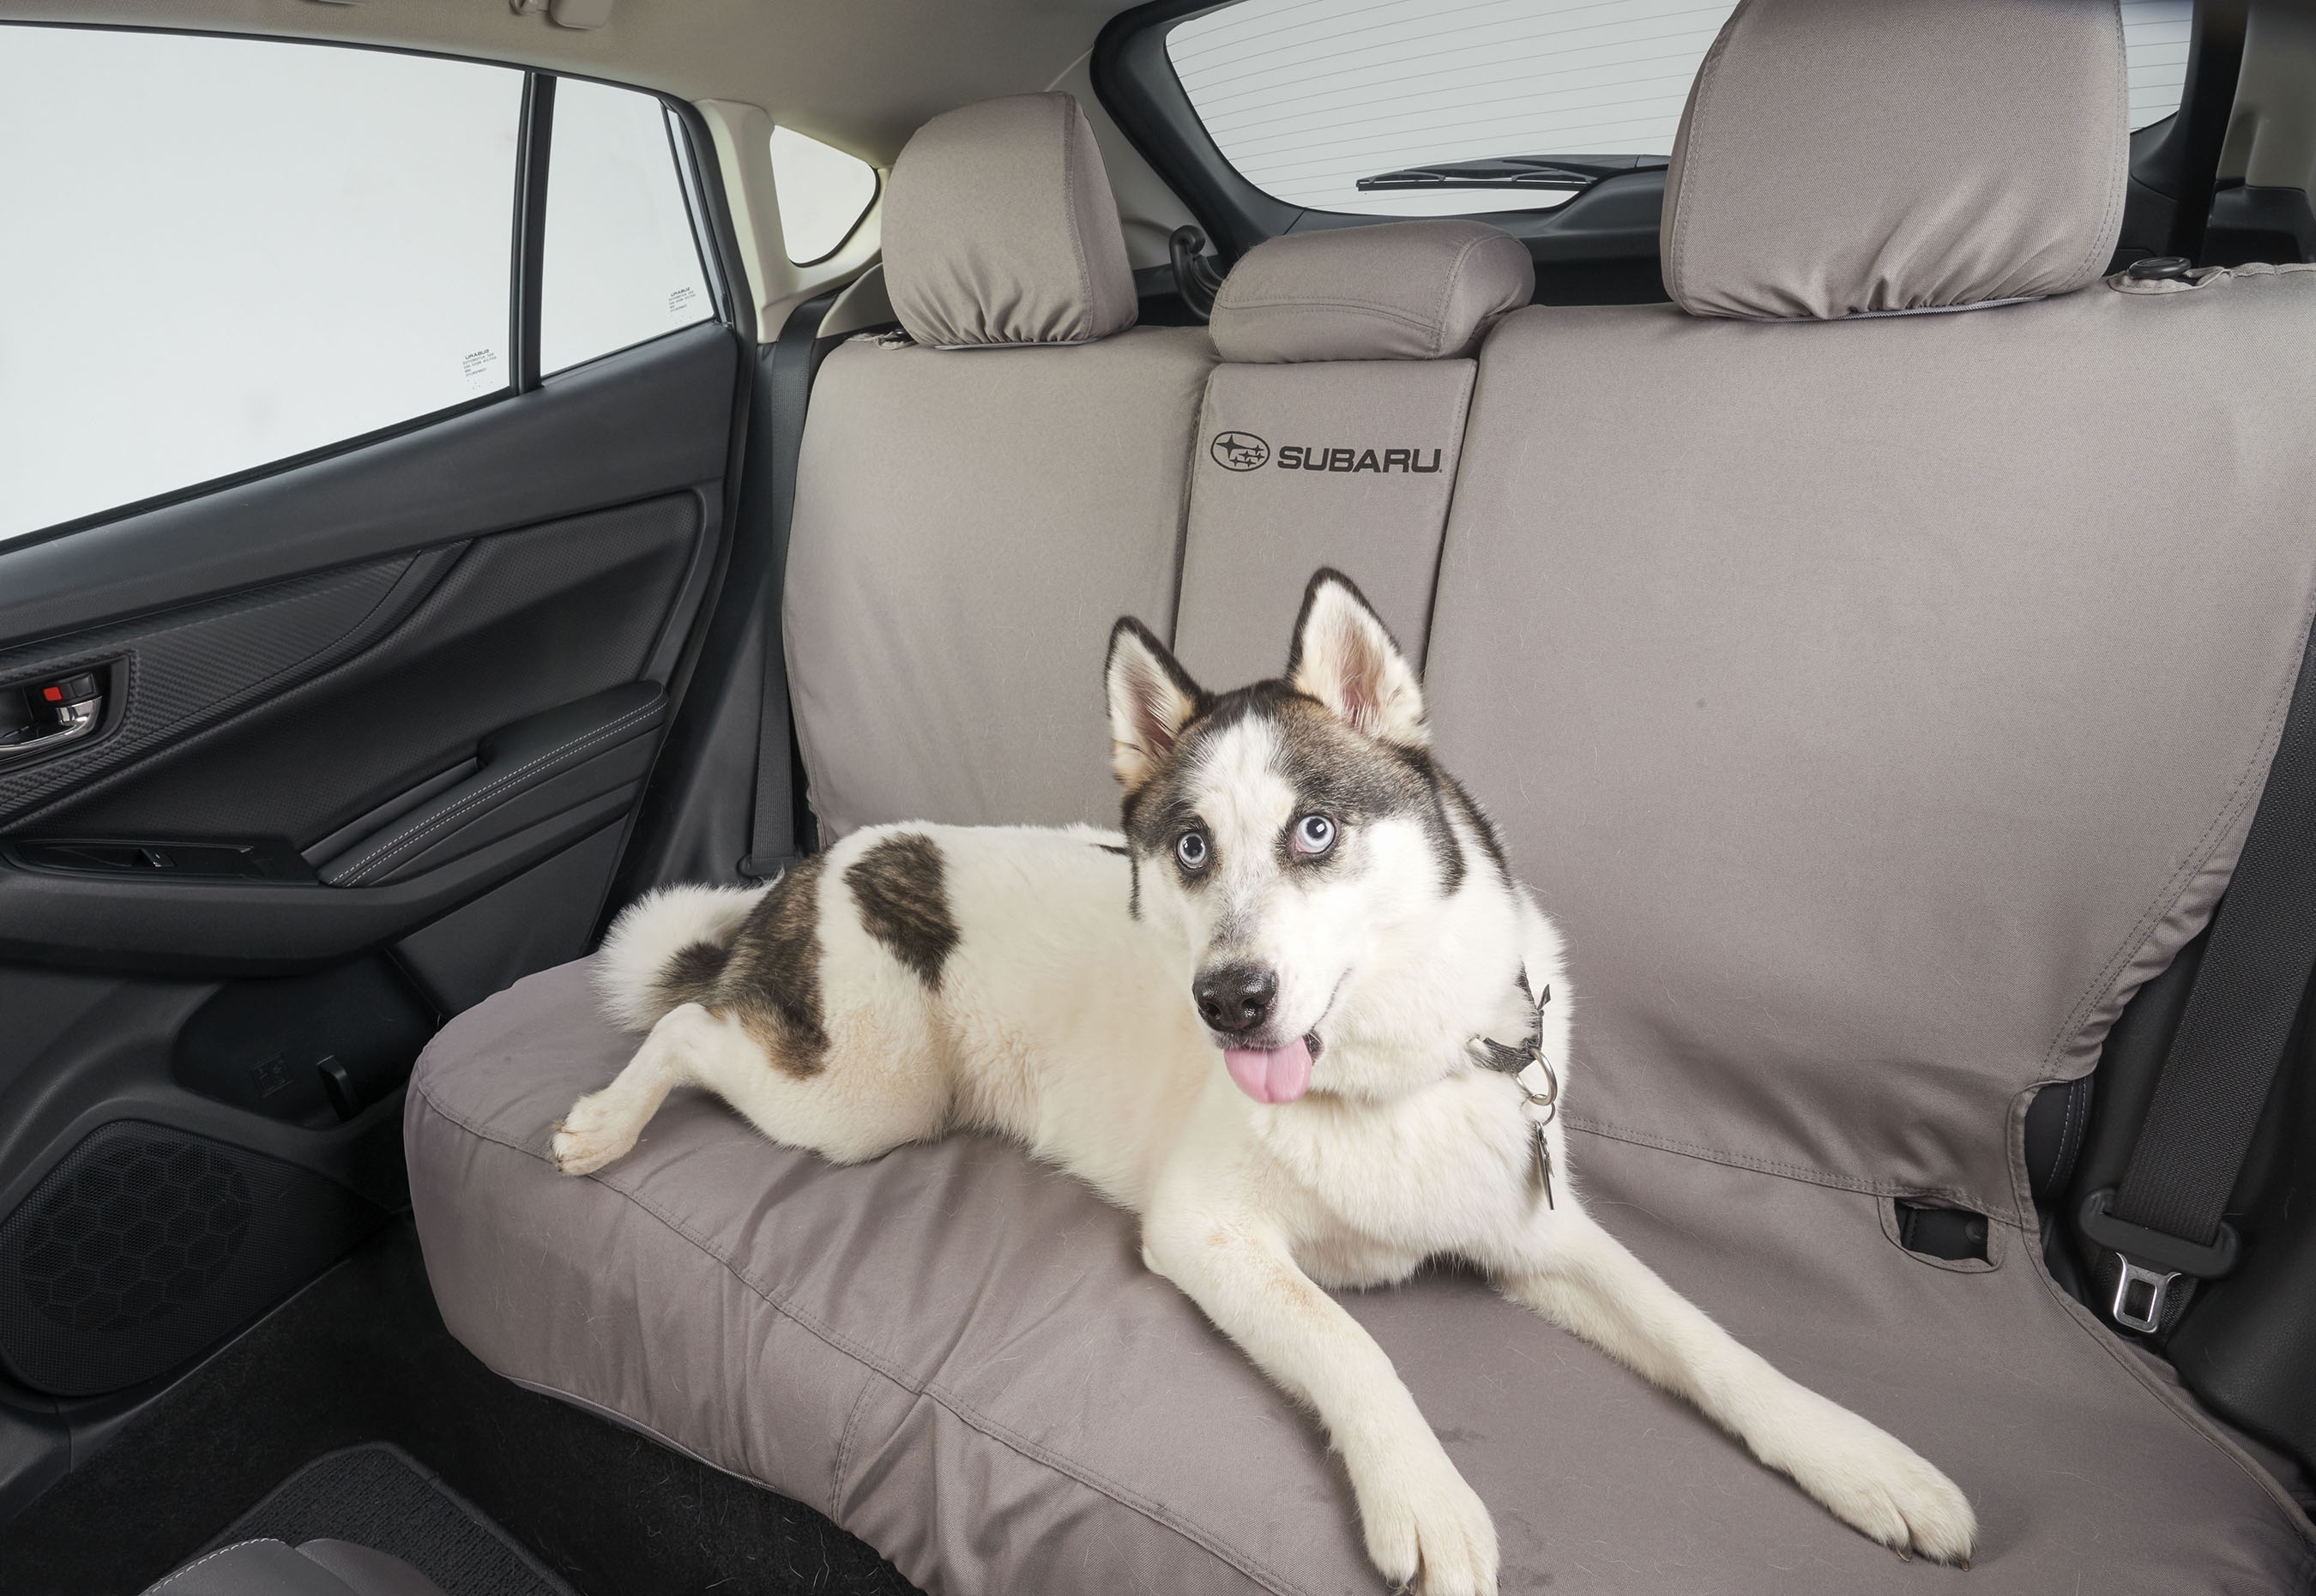 Subaru Launches Accessories Line to Keep Pets Protected and Comfortable